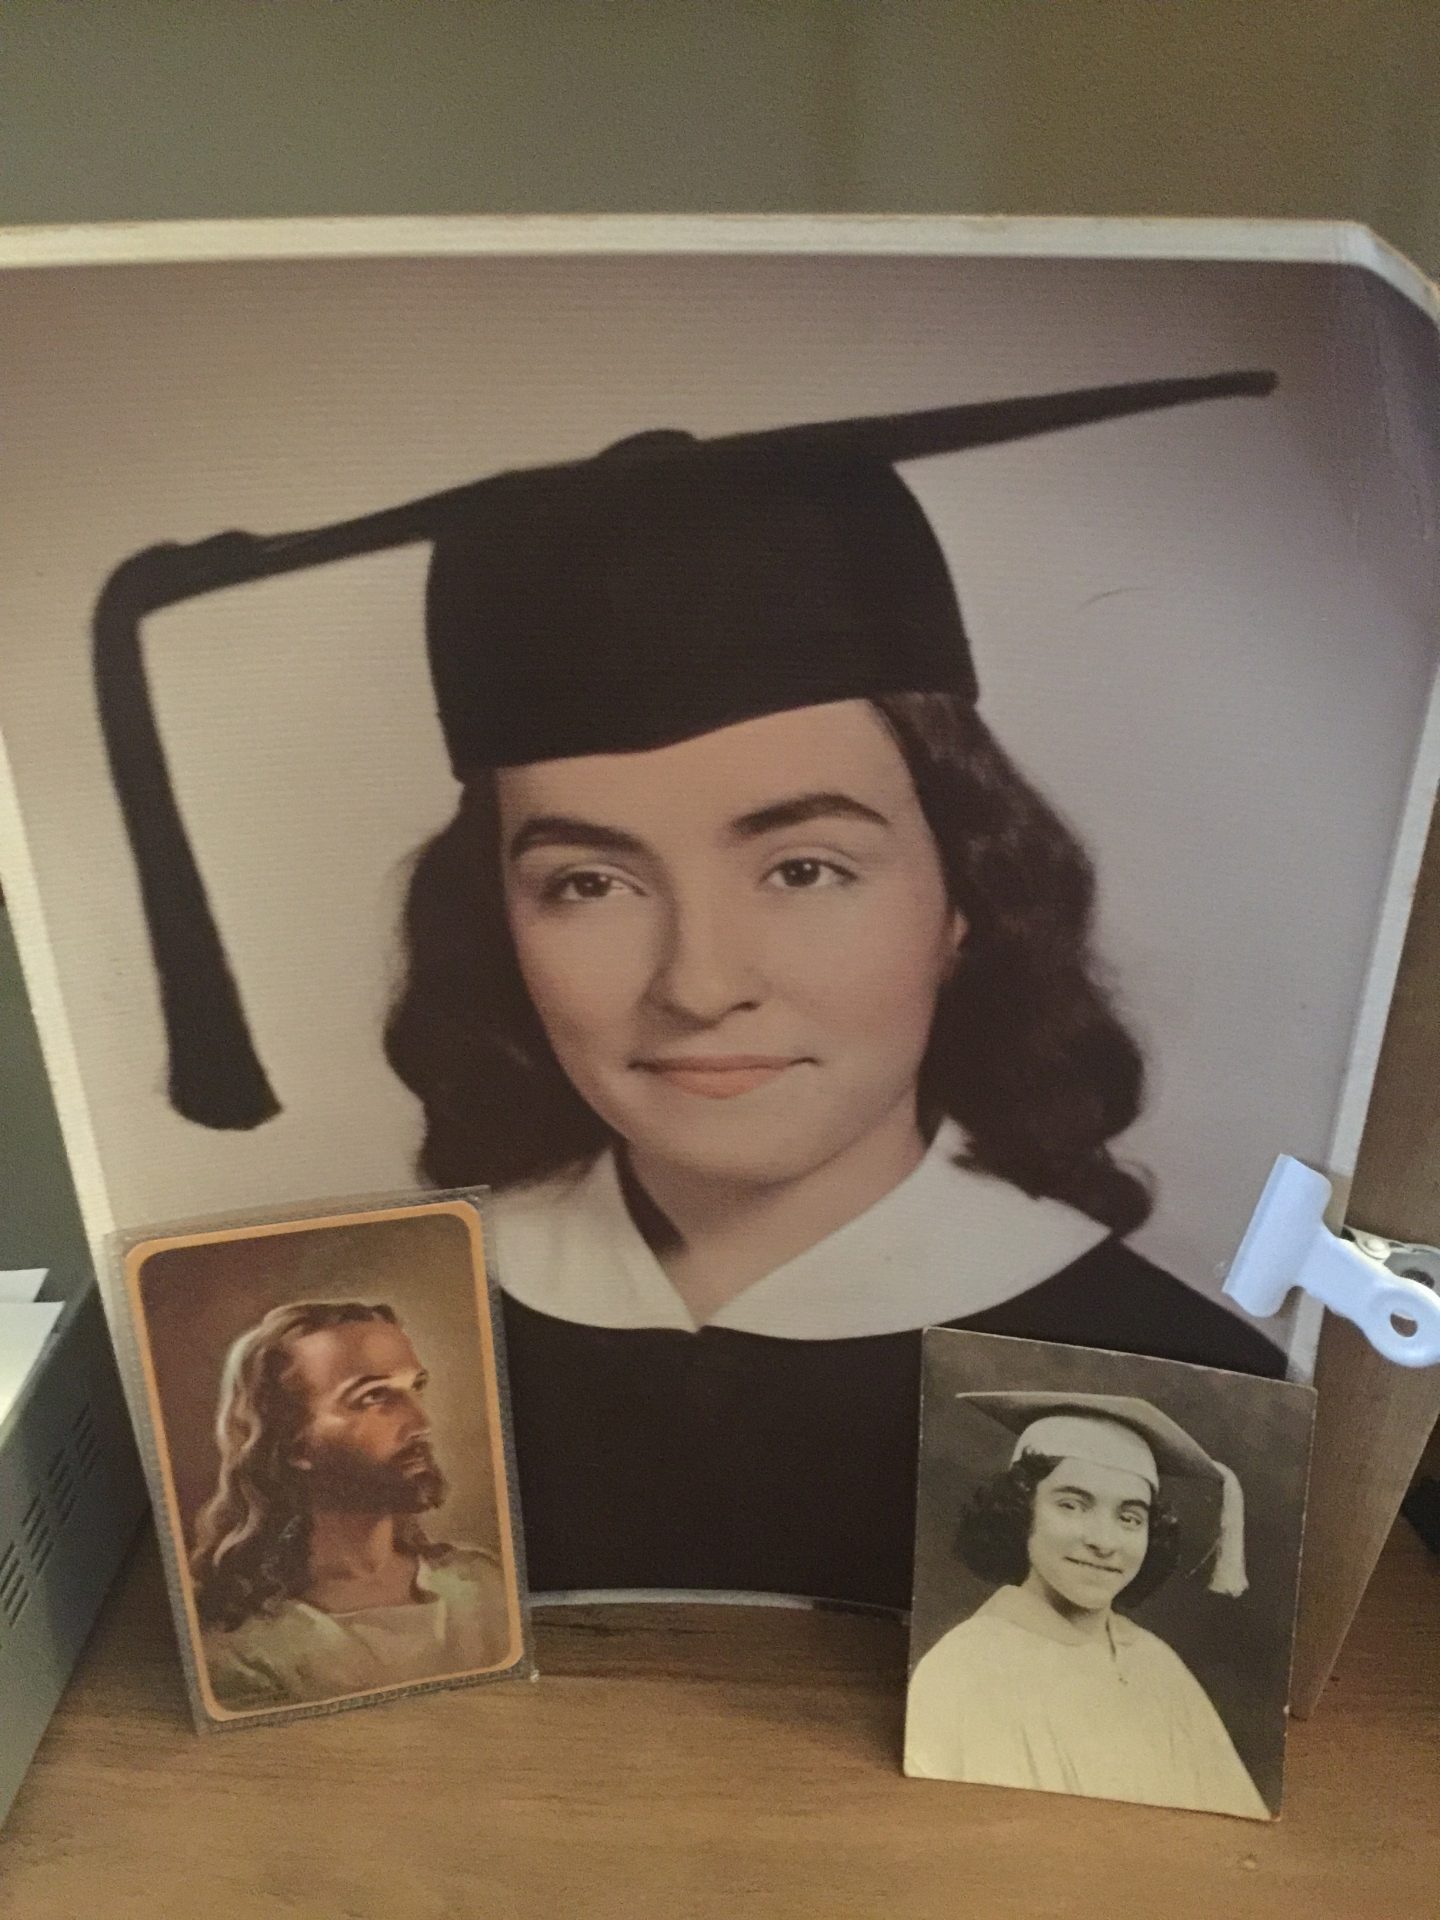 Yolanda Figueroa HS graduation picture .  She loved her family.  Rest In Peace with Jesus Christ.  I know you are now dancing with your mama and Papi ❤️❤️